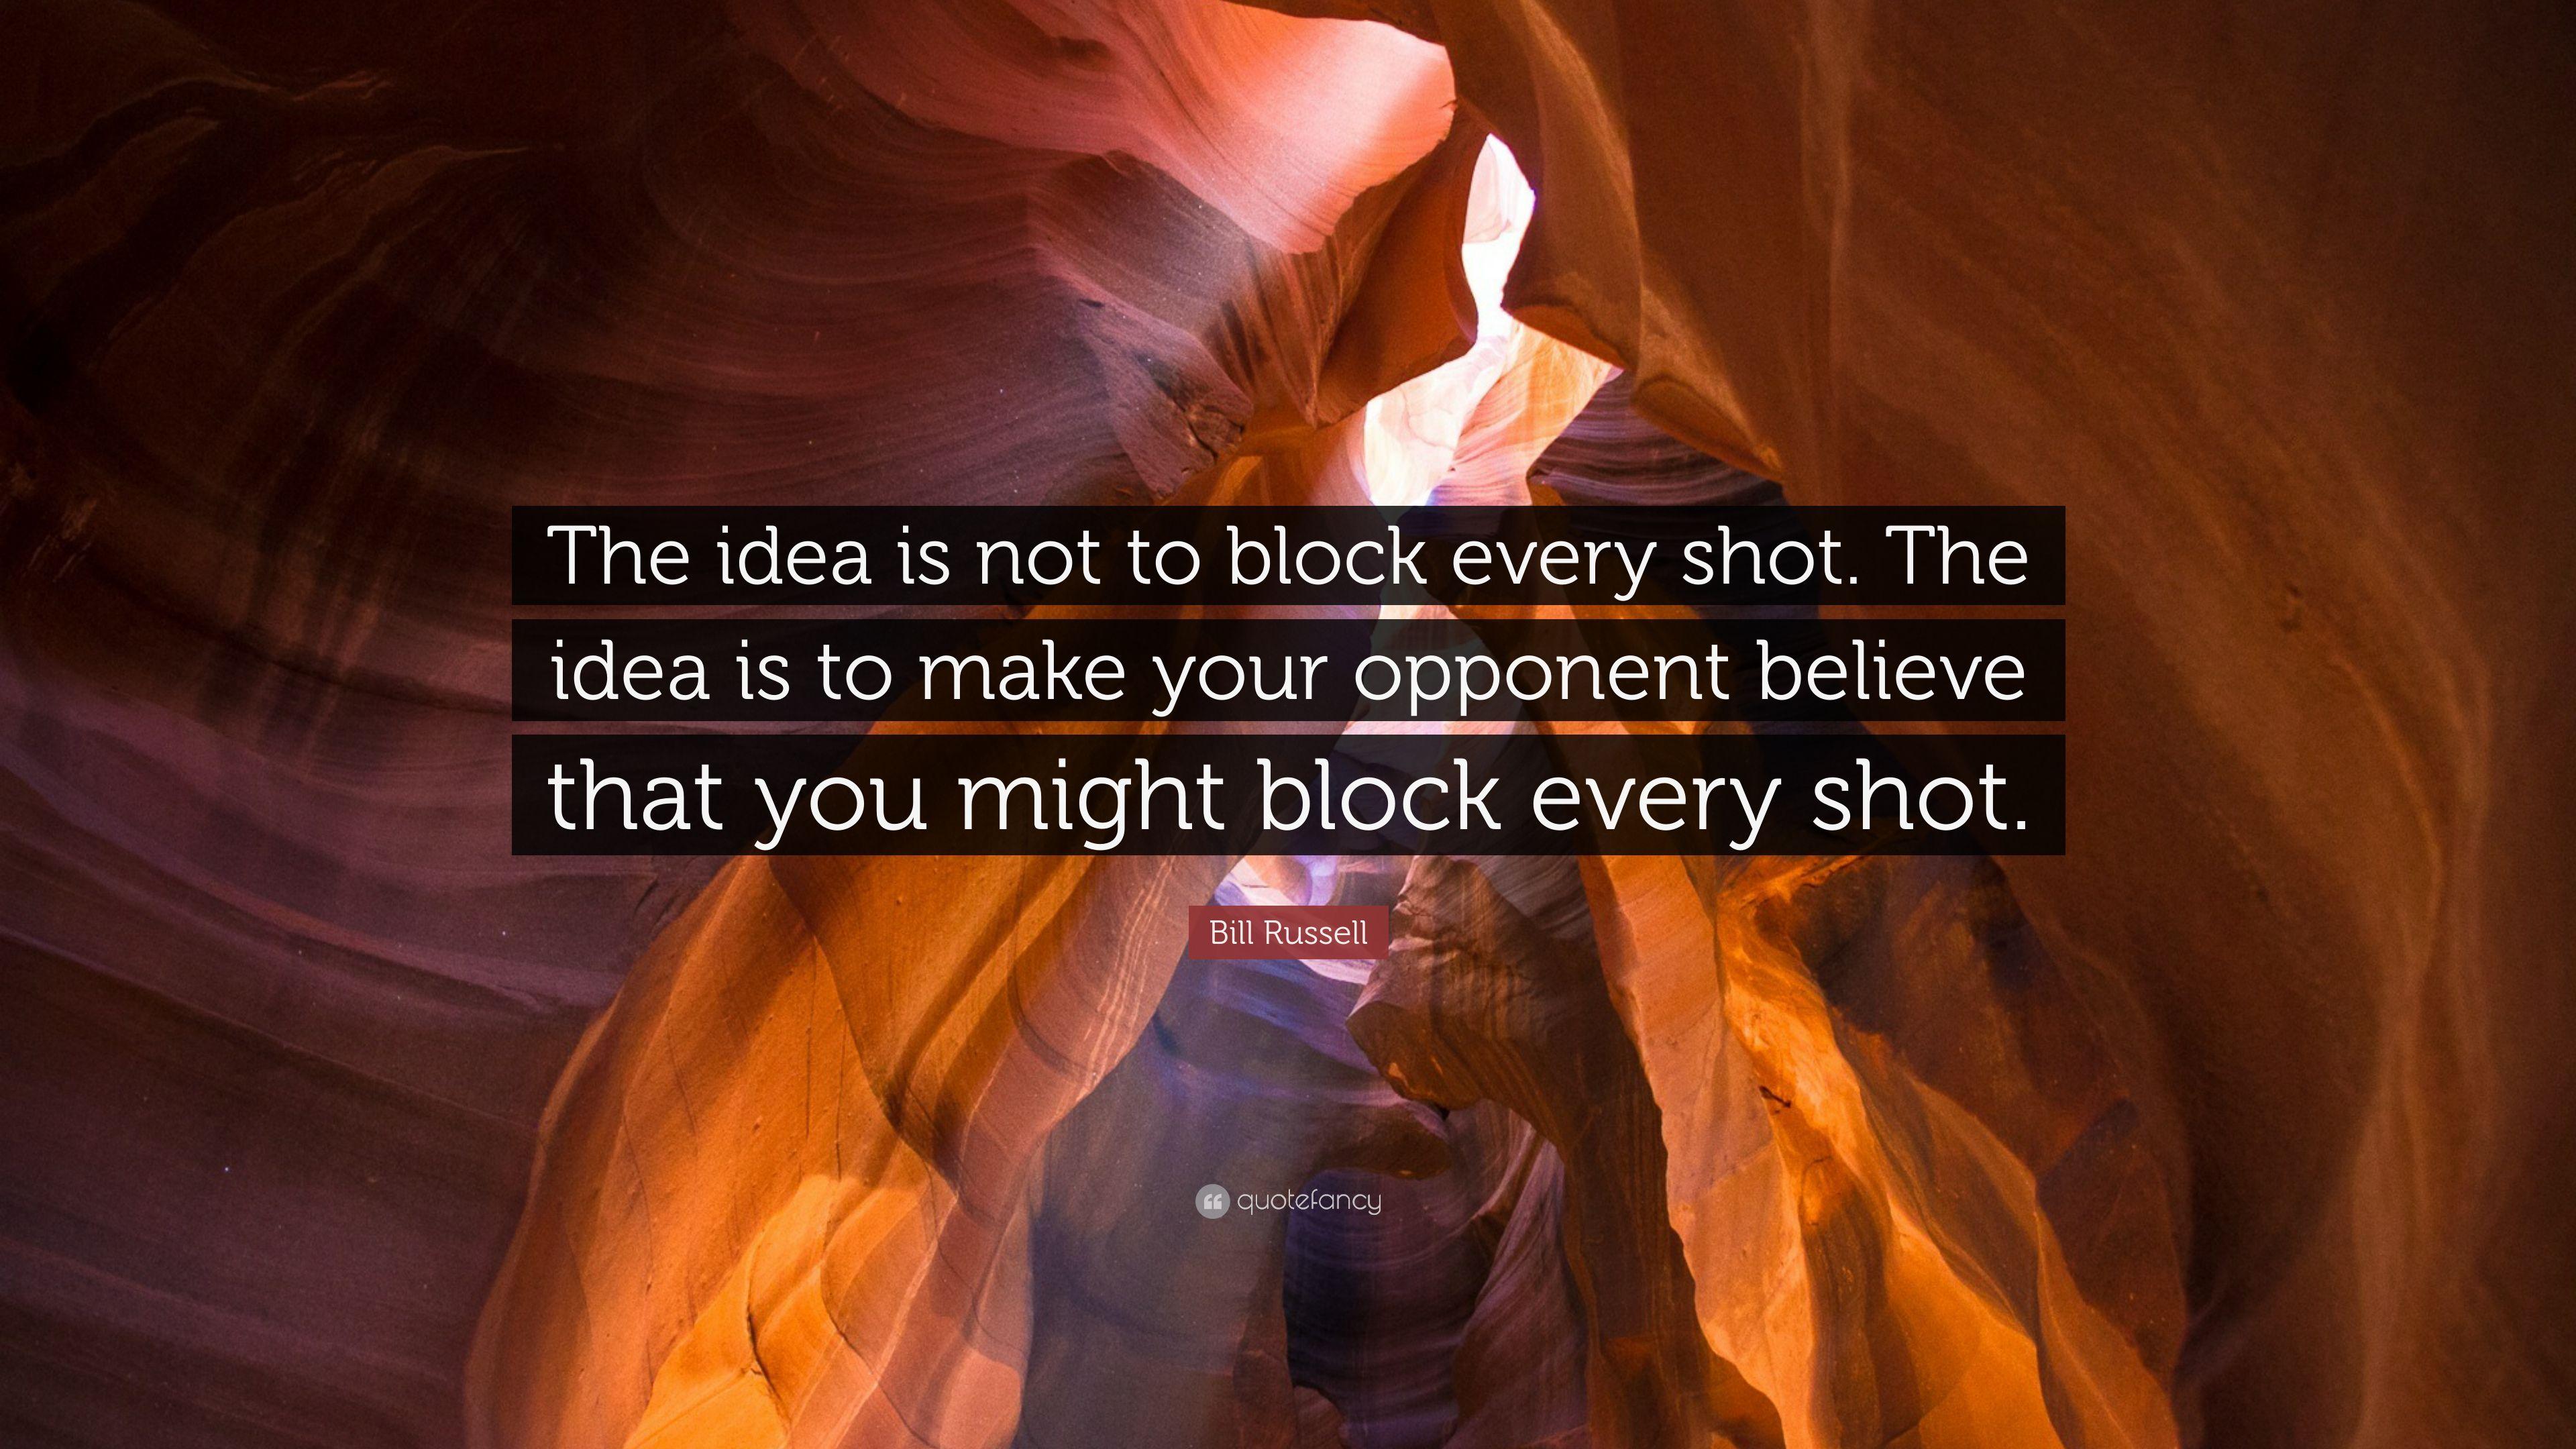 Bill Russell Quote: “The idea is not to block every shot. The idea